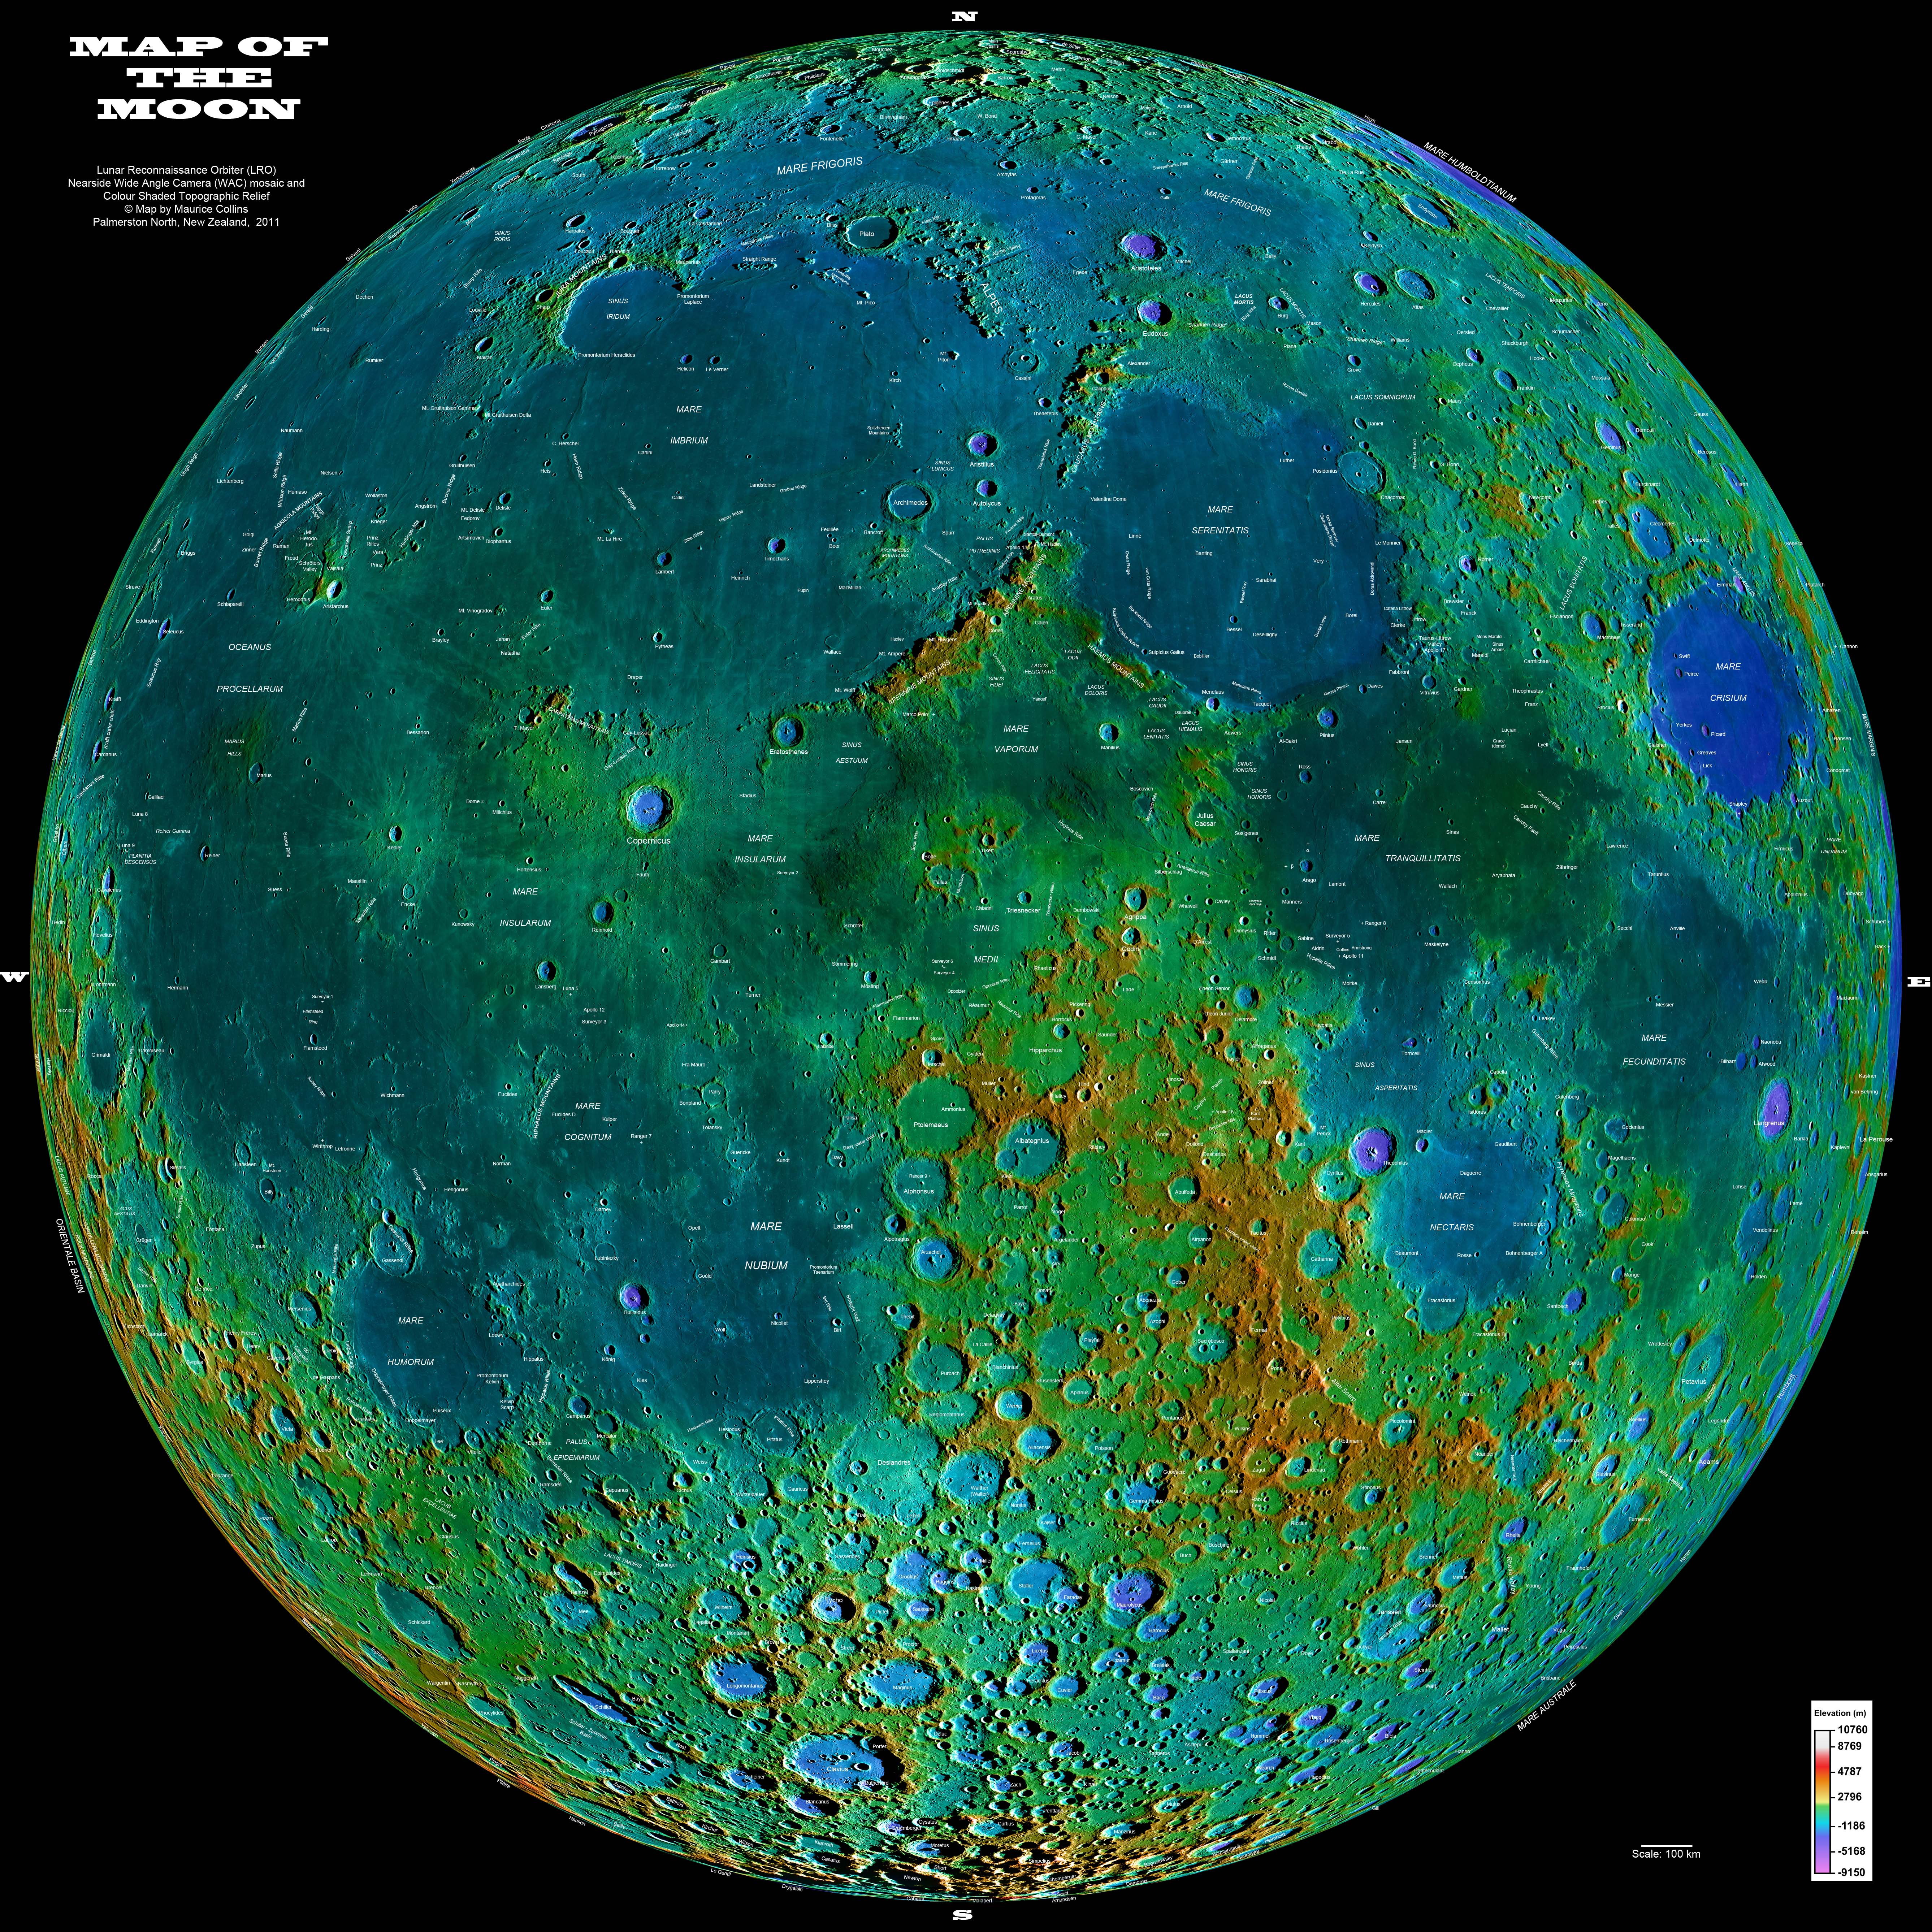 Map_of_the_Moon_Nearside_MauriceCollins.jpg